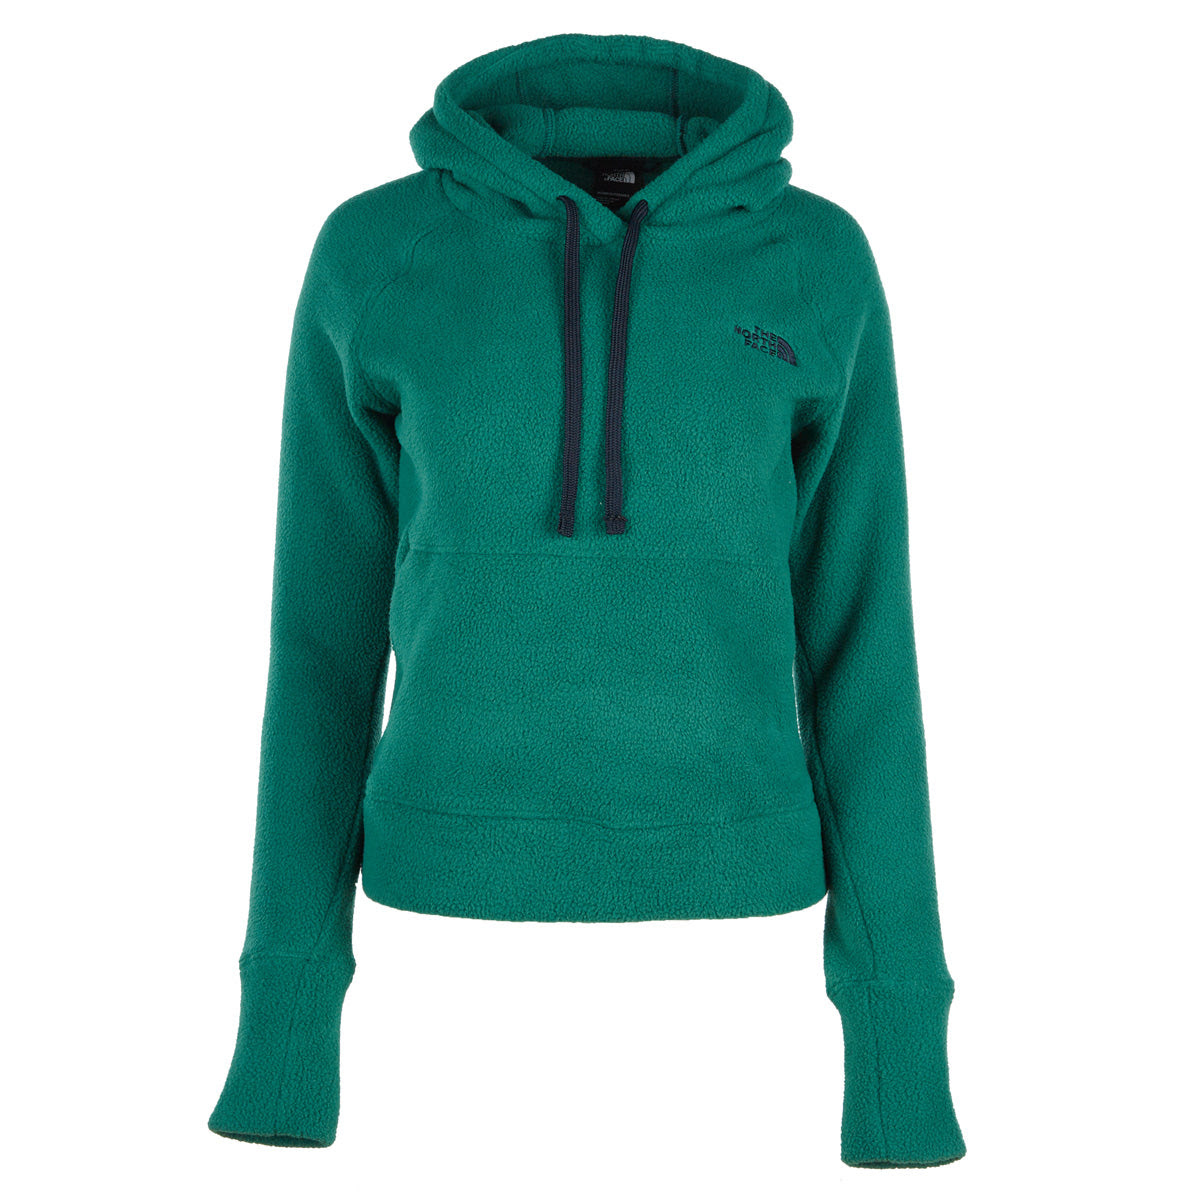  The North Face Women's Hooded Sherpa Sweatshirt for $34.99+FS!